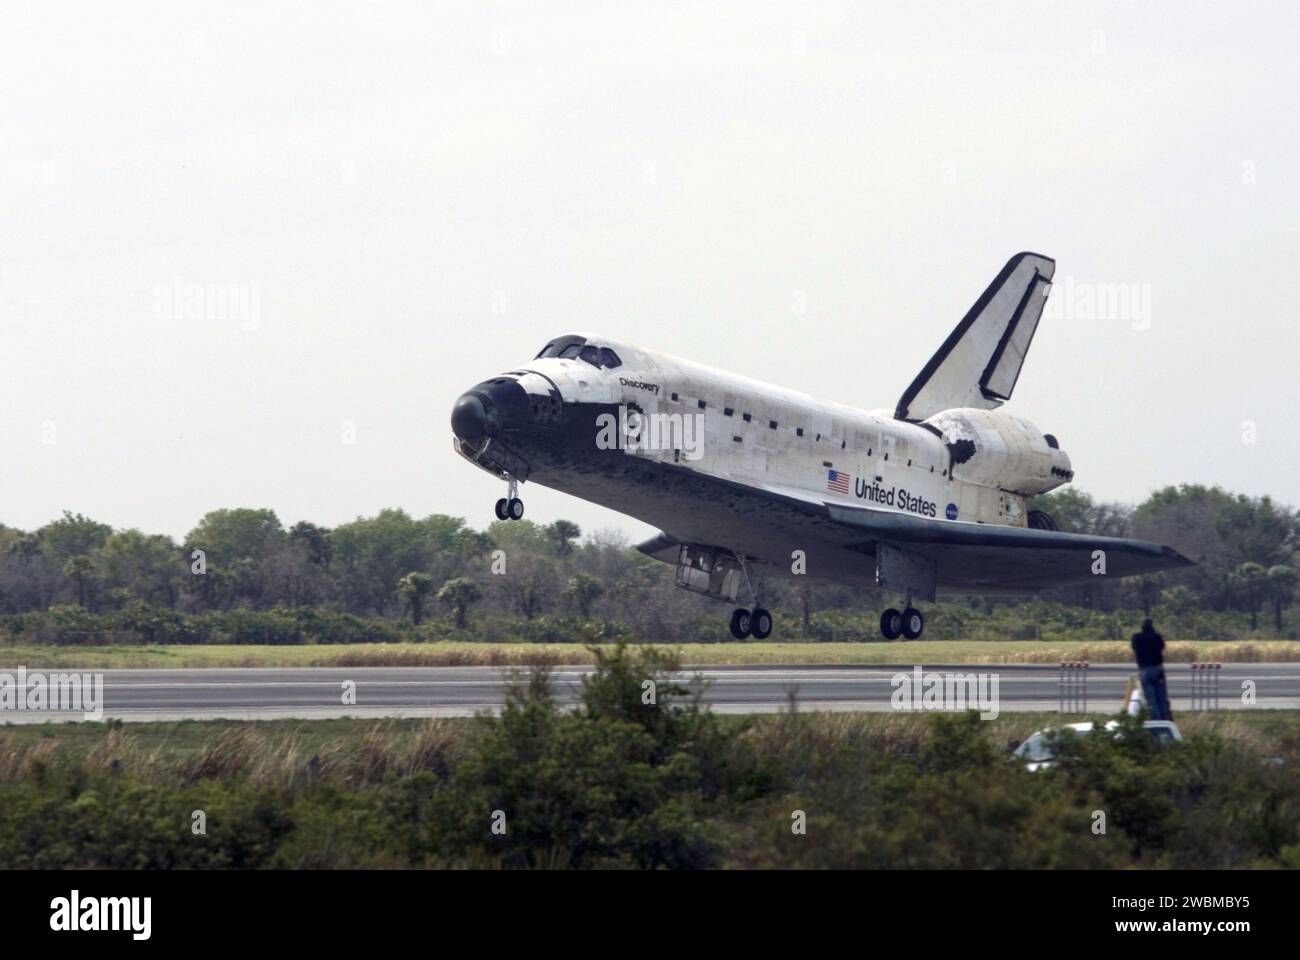 STS119-S-057 (28 March 2009) --- Space Shuttle Discovery approaches landing on Runway 15 of the Shuttle Landing Facility at NASA's Kennedy Space Center, concluding the 13-day, 5.3-million mile journey of the STS-119 mission to the International Space Station. Onboard are NASA astronauts Lee Archambault, commander; Tony Antonelli, pilot; Steve Swanson, Richard Arnold, Joseph Acaba, John Phillips and Sandra Magnus, all mission specialists. The main landing gear touched down at 3:13:17 p.m. (EDT) on March 28, 2009. The nose gear touched down at 3:13:40 p.m. and wheels stop was at 3:14:45 p.m. Dur Stock Photo